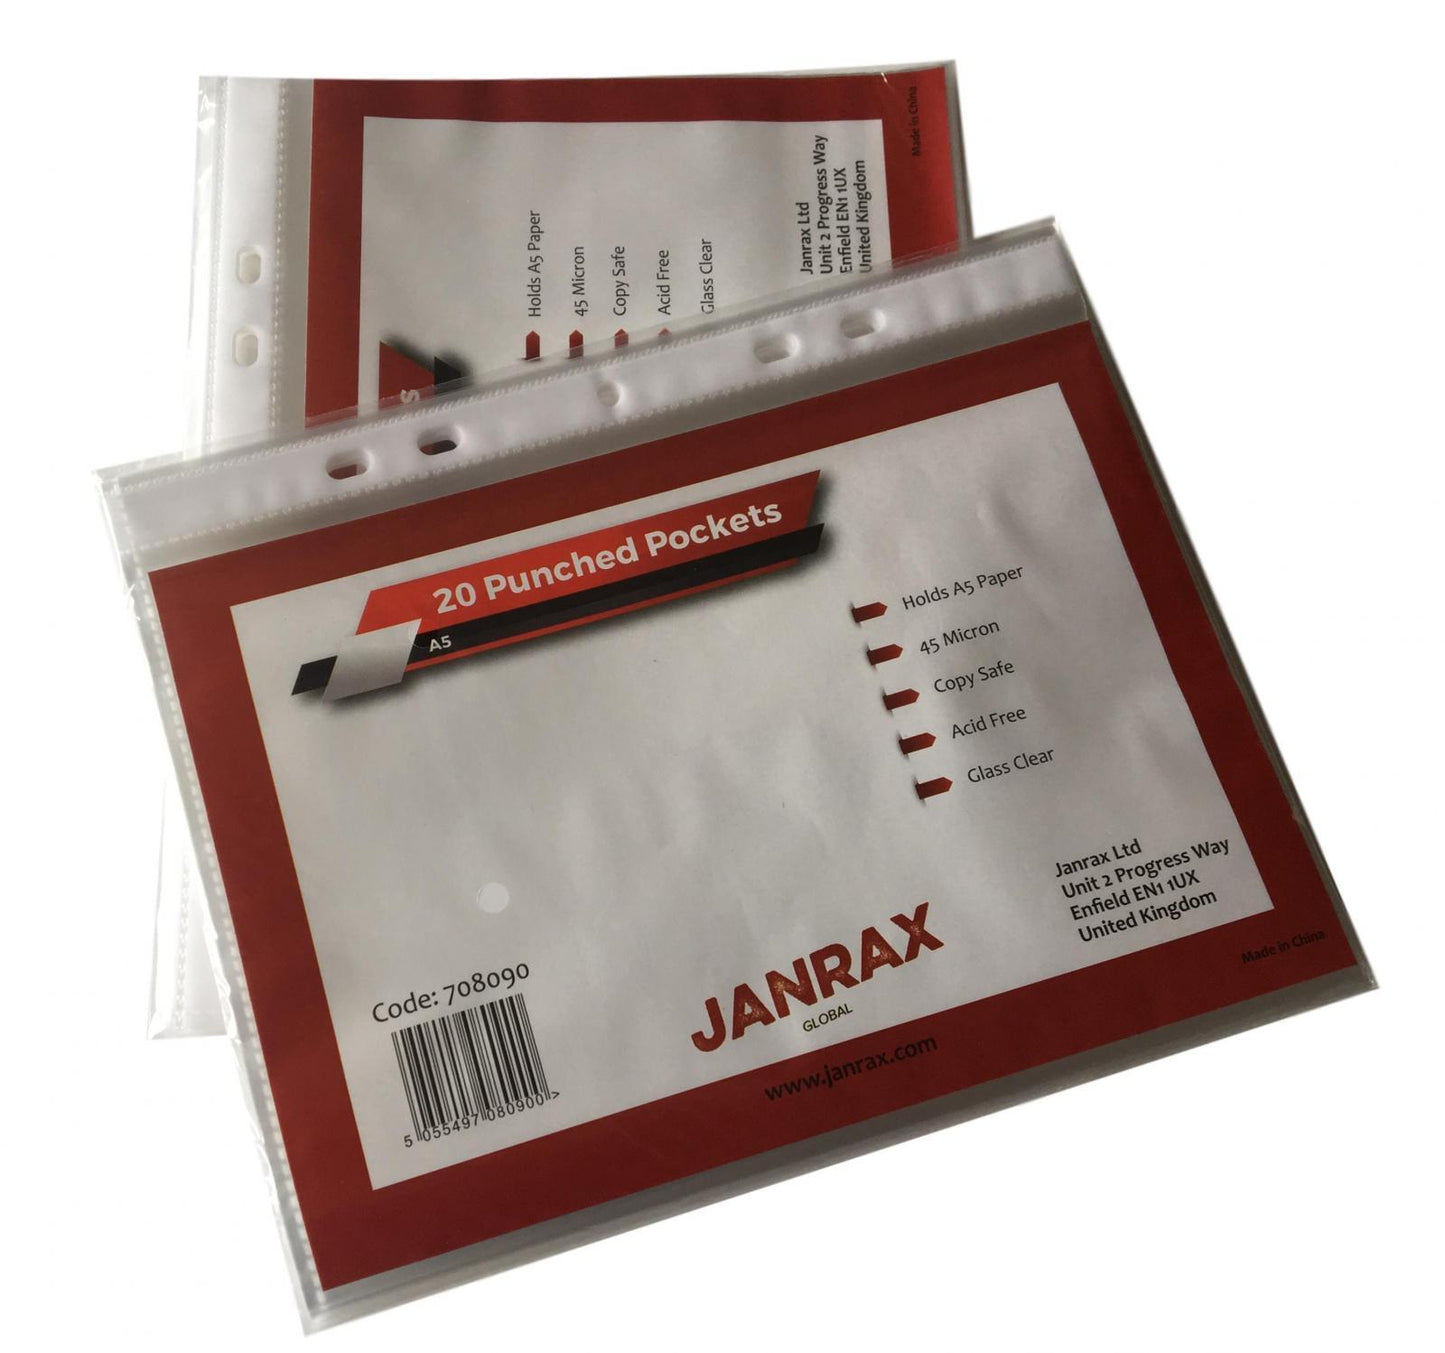 Pack of 20 A5 Glass Clear Punched Pockets by Janrax